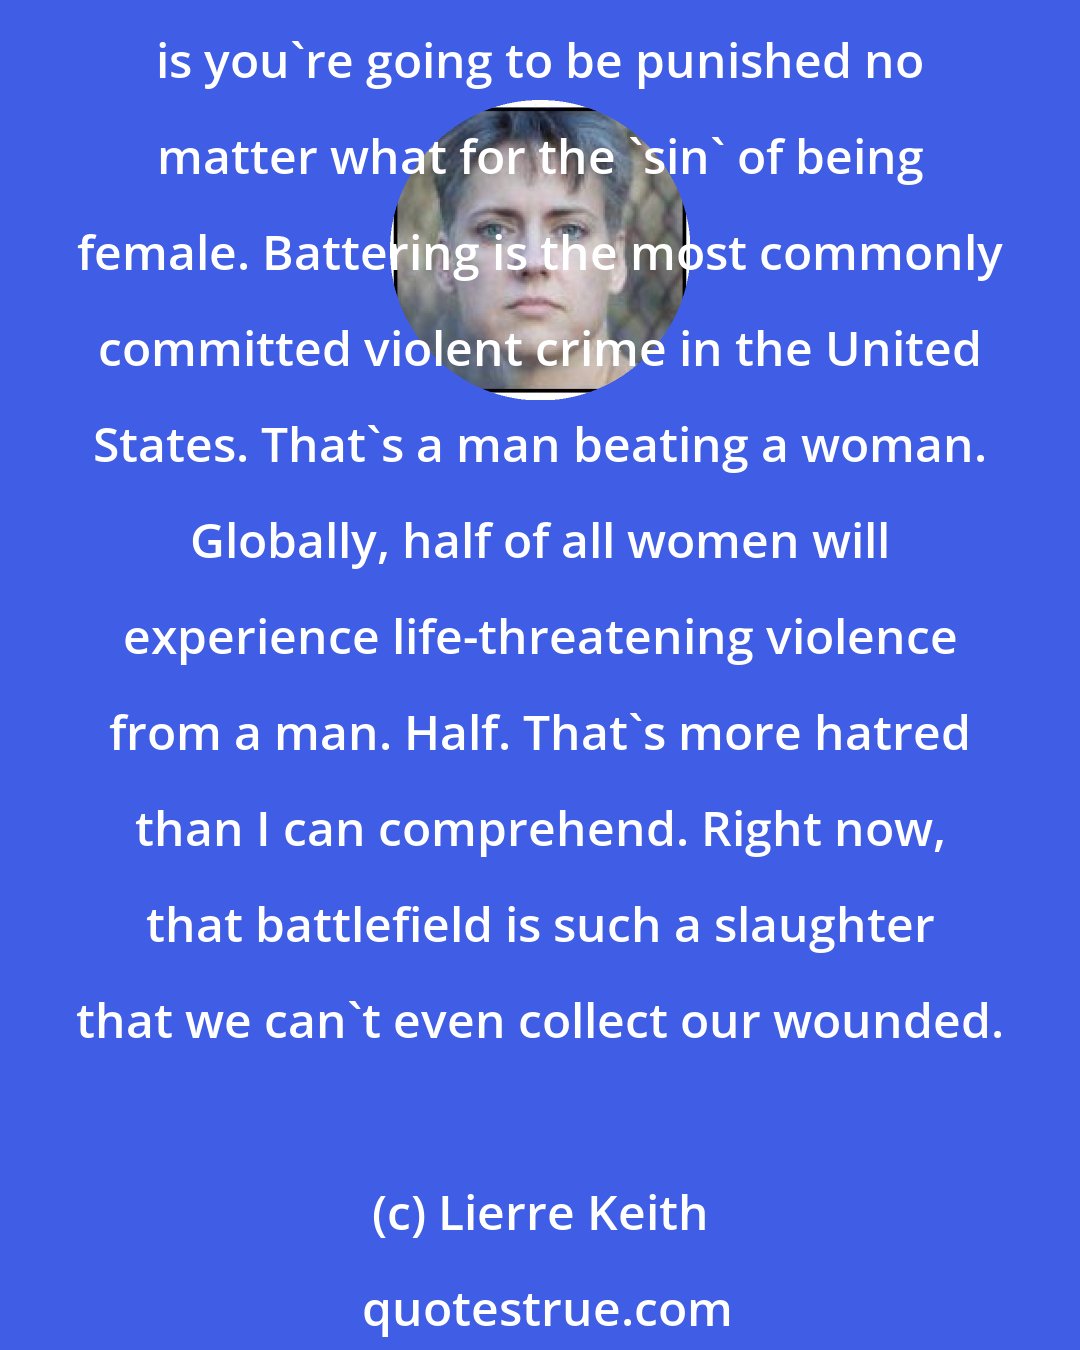 Lierre Keith: Men: Stand in solidarity with women. Women, if you were born female, you were born on a battlefield. You will be punished for even saying that out loud, but the grim truth is you're going to be punished no matter what for the 'sin' of being female. Battering is the most commonly committed violent crime in the United States. That's a man beating a woman. Globally, half of all women will experience life-threatening violence from a man. Half. That's more hatred than I can comprehend. Right now, that battlefield is such a slaughter that we can't even collect our wounded.